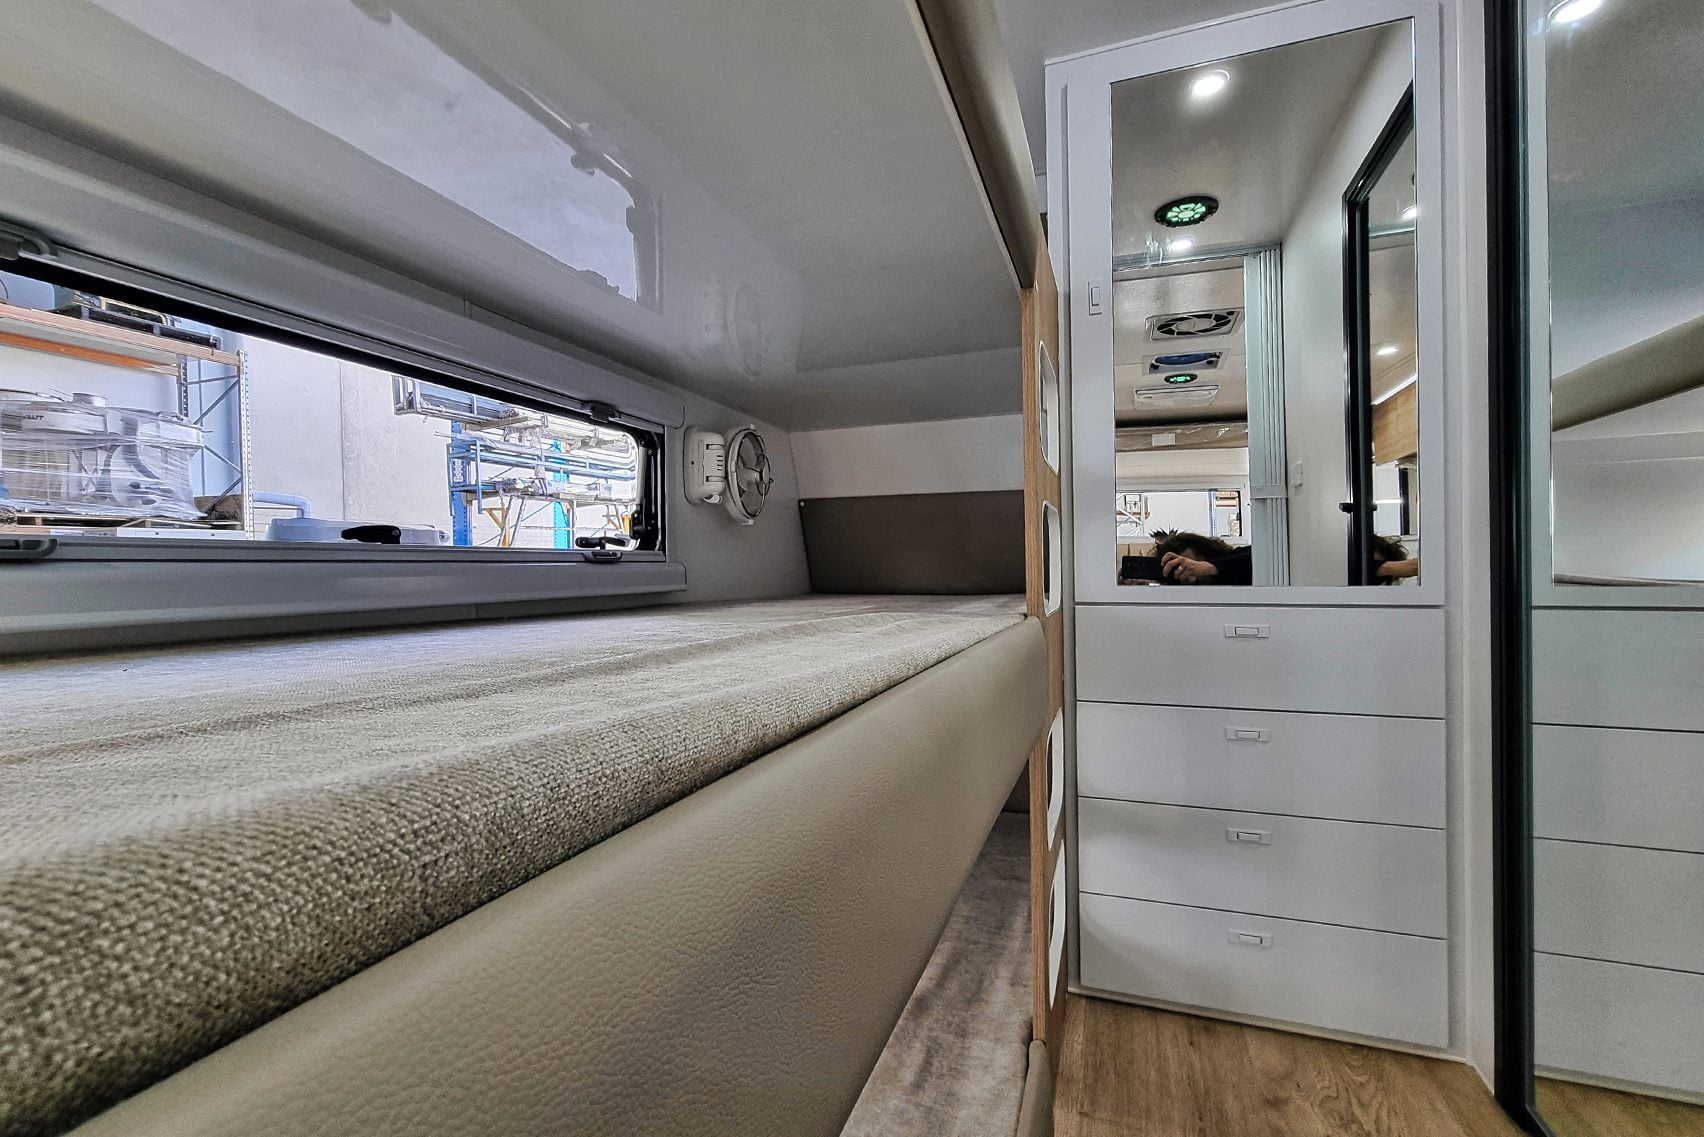 Elegant Royal Flair Aussiemate caravan with inviting kitchen seating, luminous interior, and integrated storage compartments